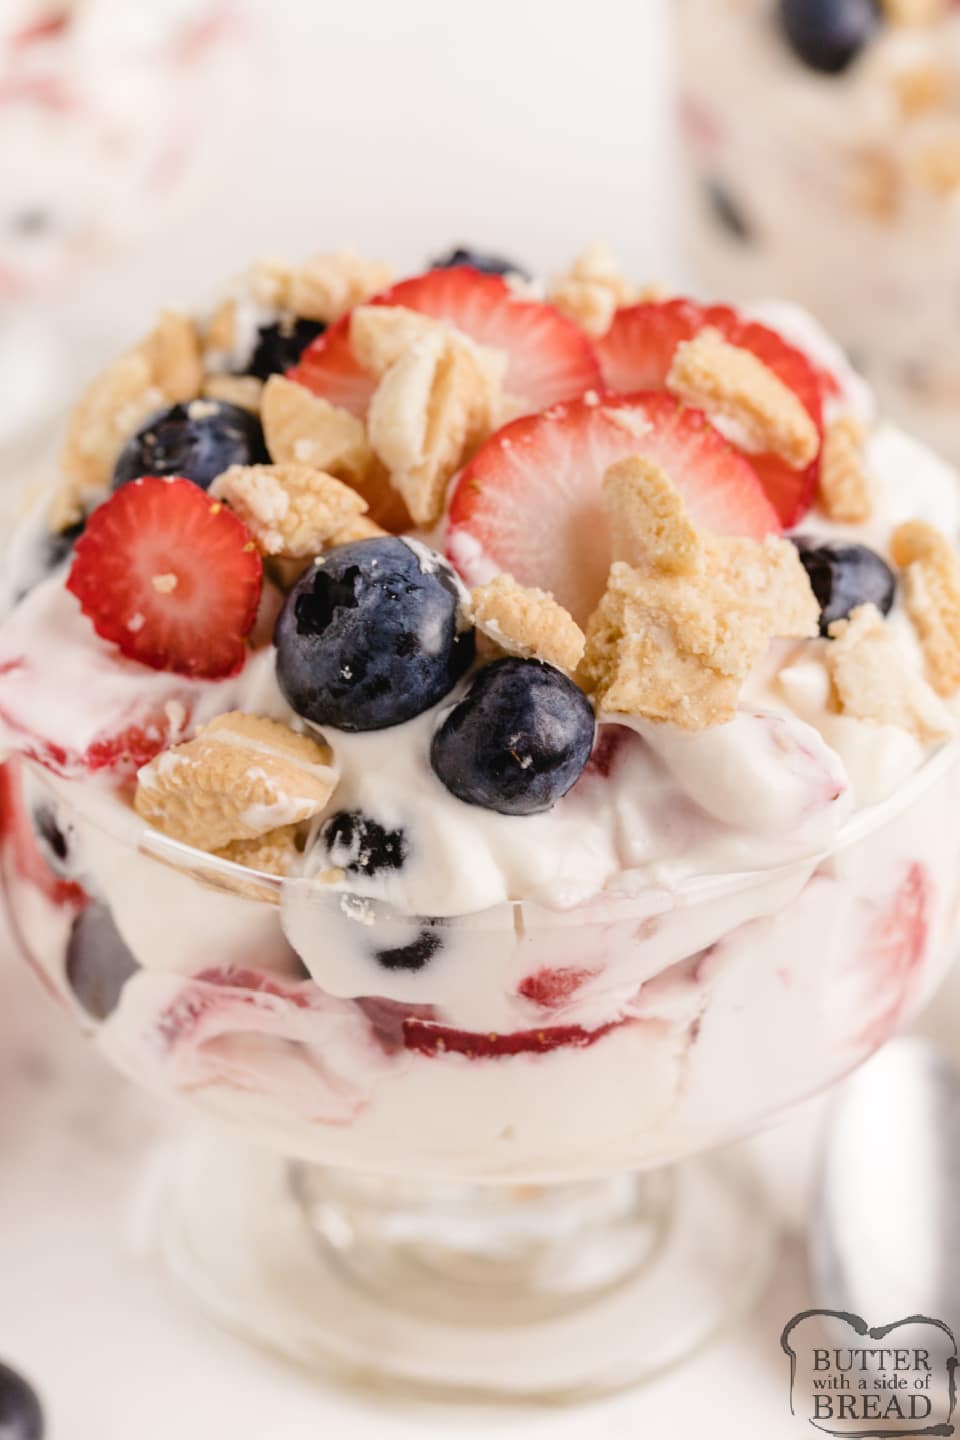 Lemon Berry Yogurt Parfaits made with sweetened whipped cream, yogurt and lots of fresh berries. Simple no-bake dessert or snack that is light and delicious!